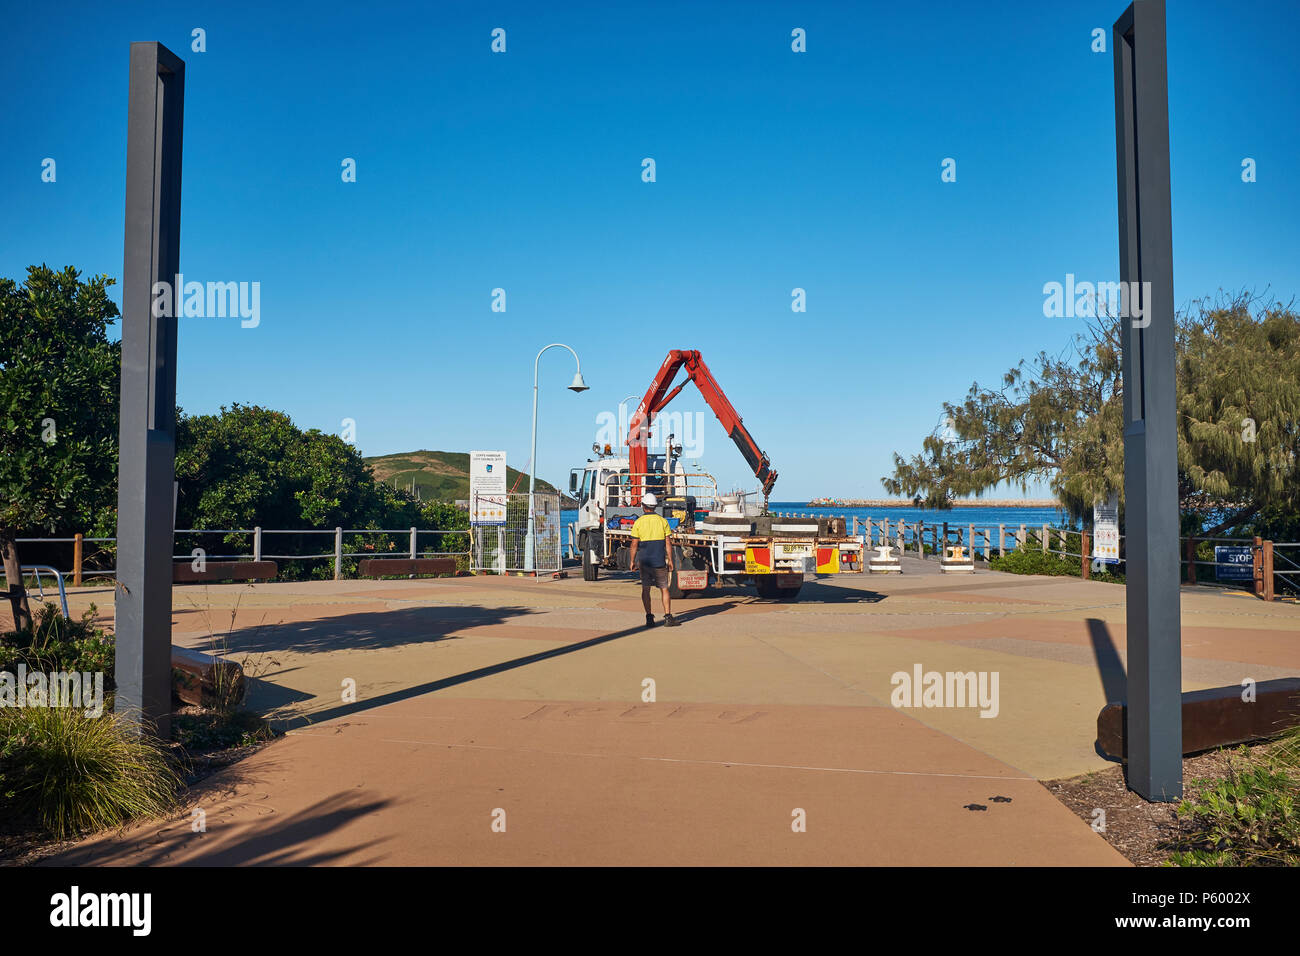 A truck and its driver unloading bollards with a crane to prevent vehicle access to the jetty, Jetty Beach, Coffs Harbour, New South Wales, Australia Stock Photo